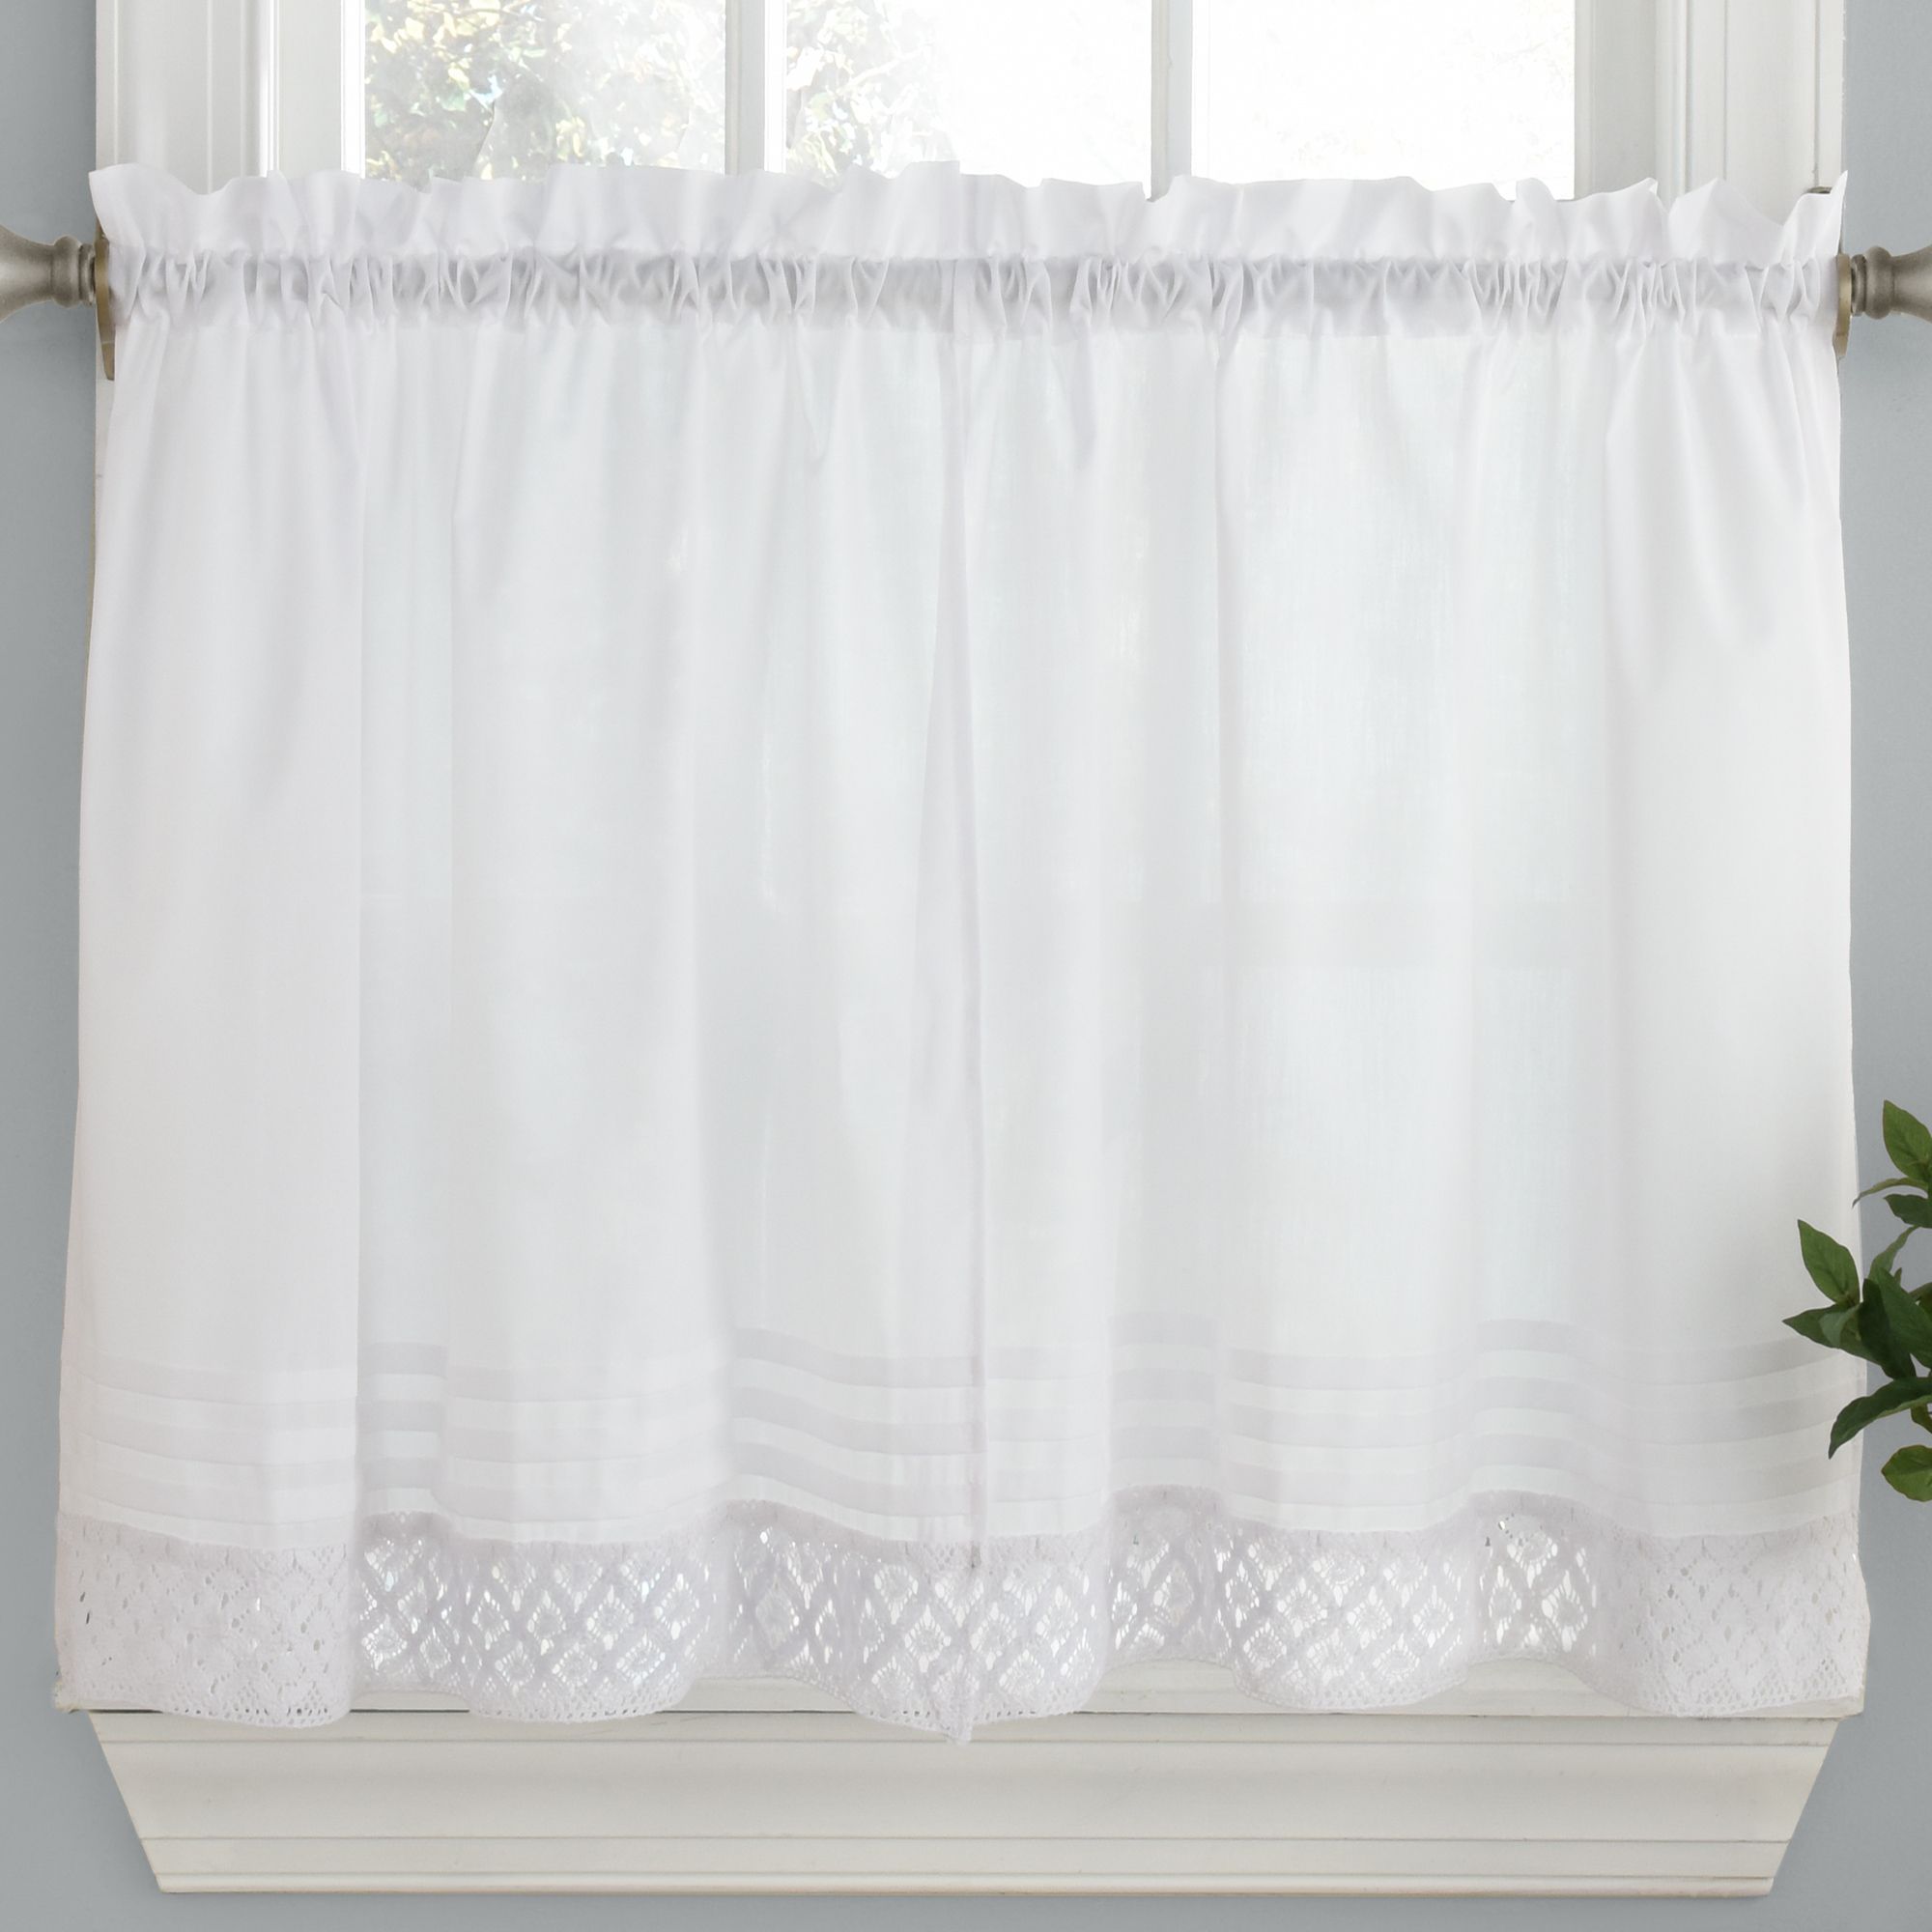 Pleated Crochet Kitchen Window Curtain Tier Pair Or Valance White For Pleated Curtain Tiers (Photo 5 of 20)